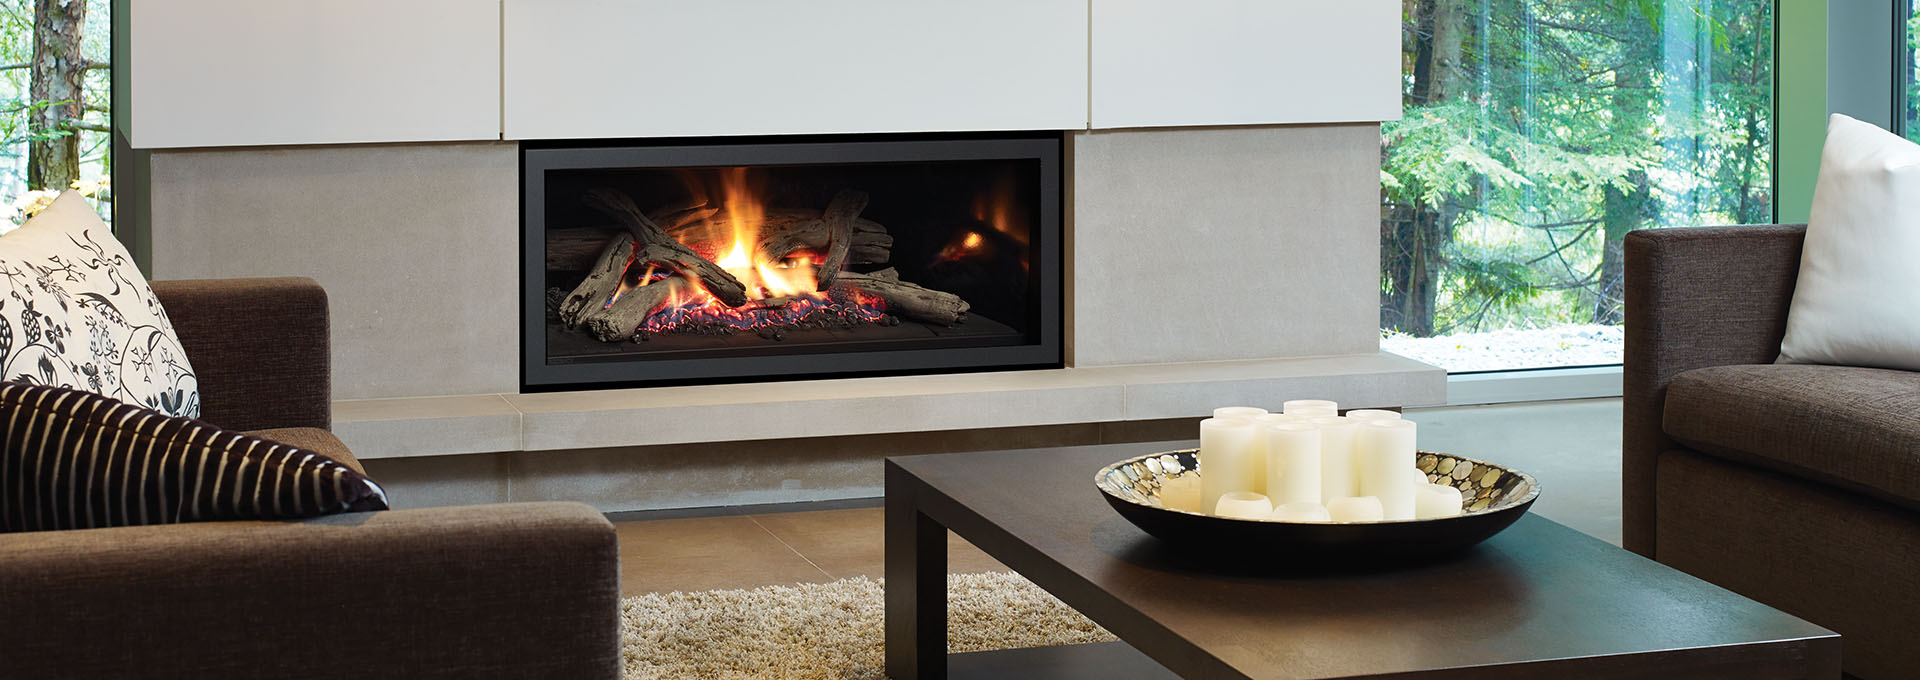 Contemporary Gas Fireplaces Linear, Slim Gas Fireplace Direct Vent